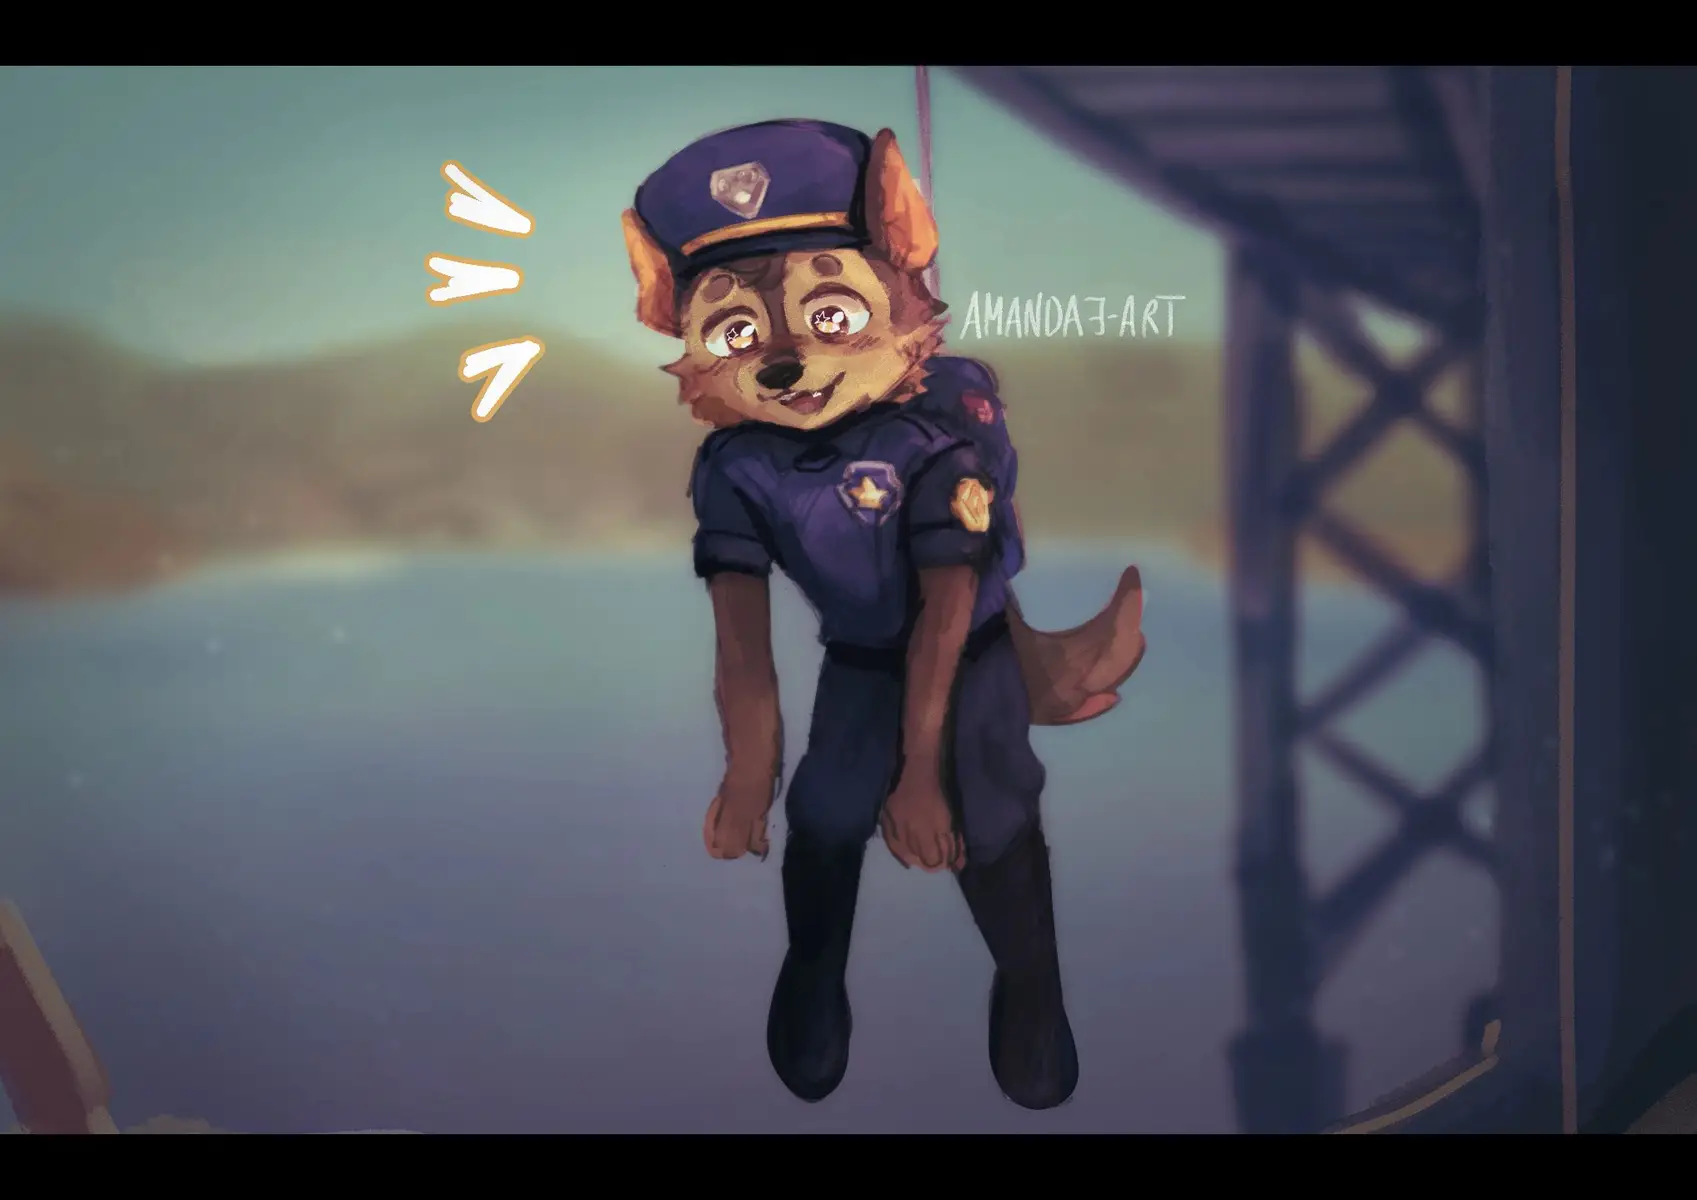 I have a new obsession with Chase from Paw Patrol. He's just so cute!  #art #illustration #pawpatrol #fyp #foryoupage #pawpatrolthemightymovie #pawpatroltiktok #pawpatrolmovie #pawpatrolchase #chase #redraw #sceneredraw #anthro #pawpatrolfanart 